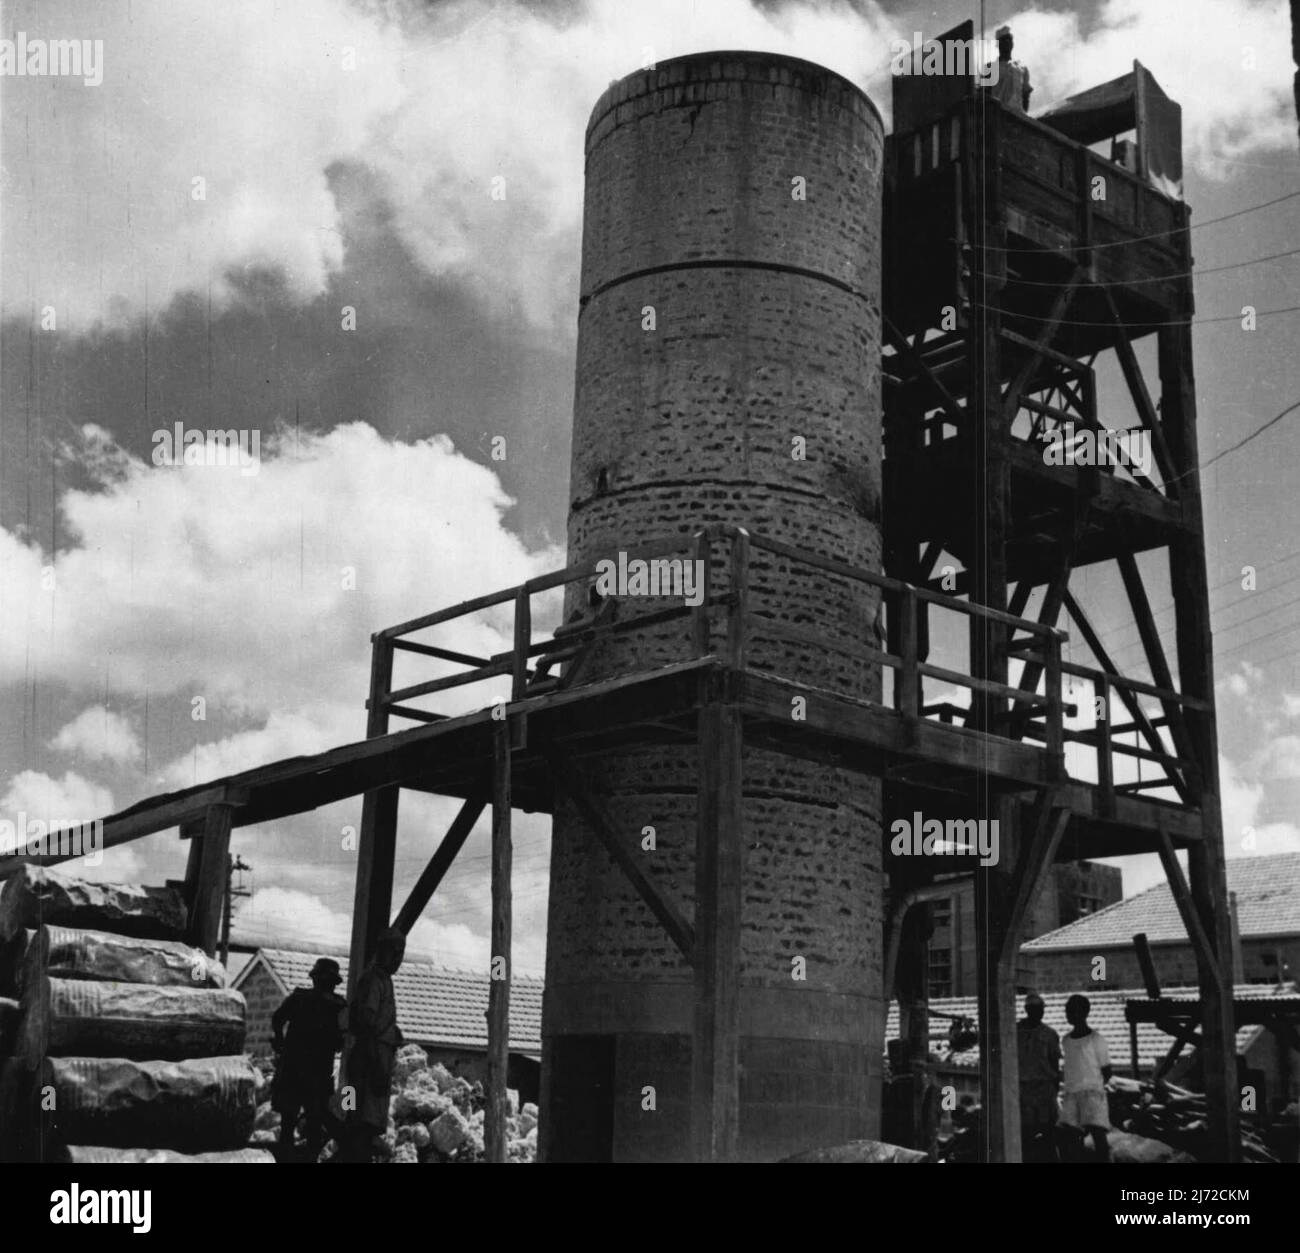 Caustic Soda Plant And Sulphuric Acid Plant -- Klin for burning lime. One of the industries being encouraged by the East African Industrial Management Board. September 13, 1951. (Photo by British Official Photograph). Stock Photo